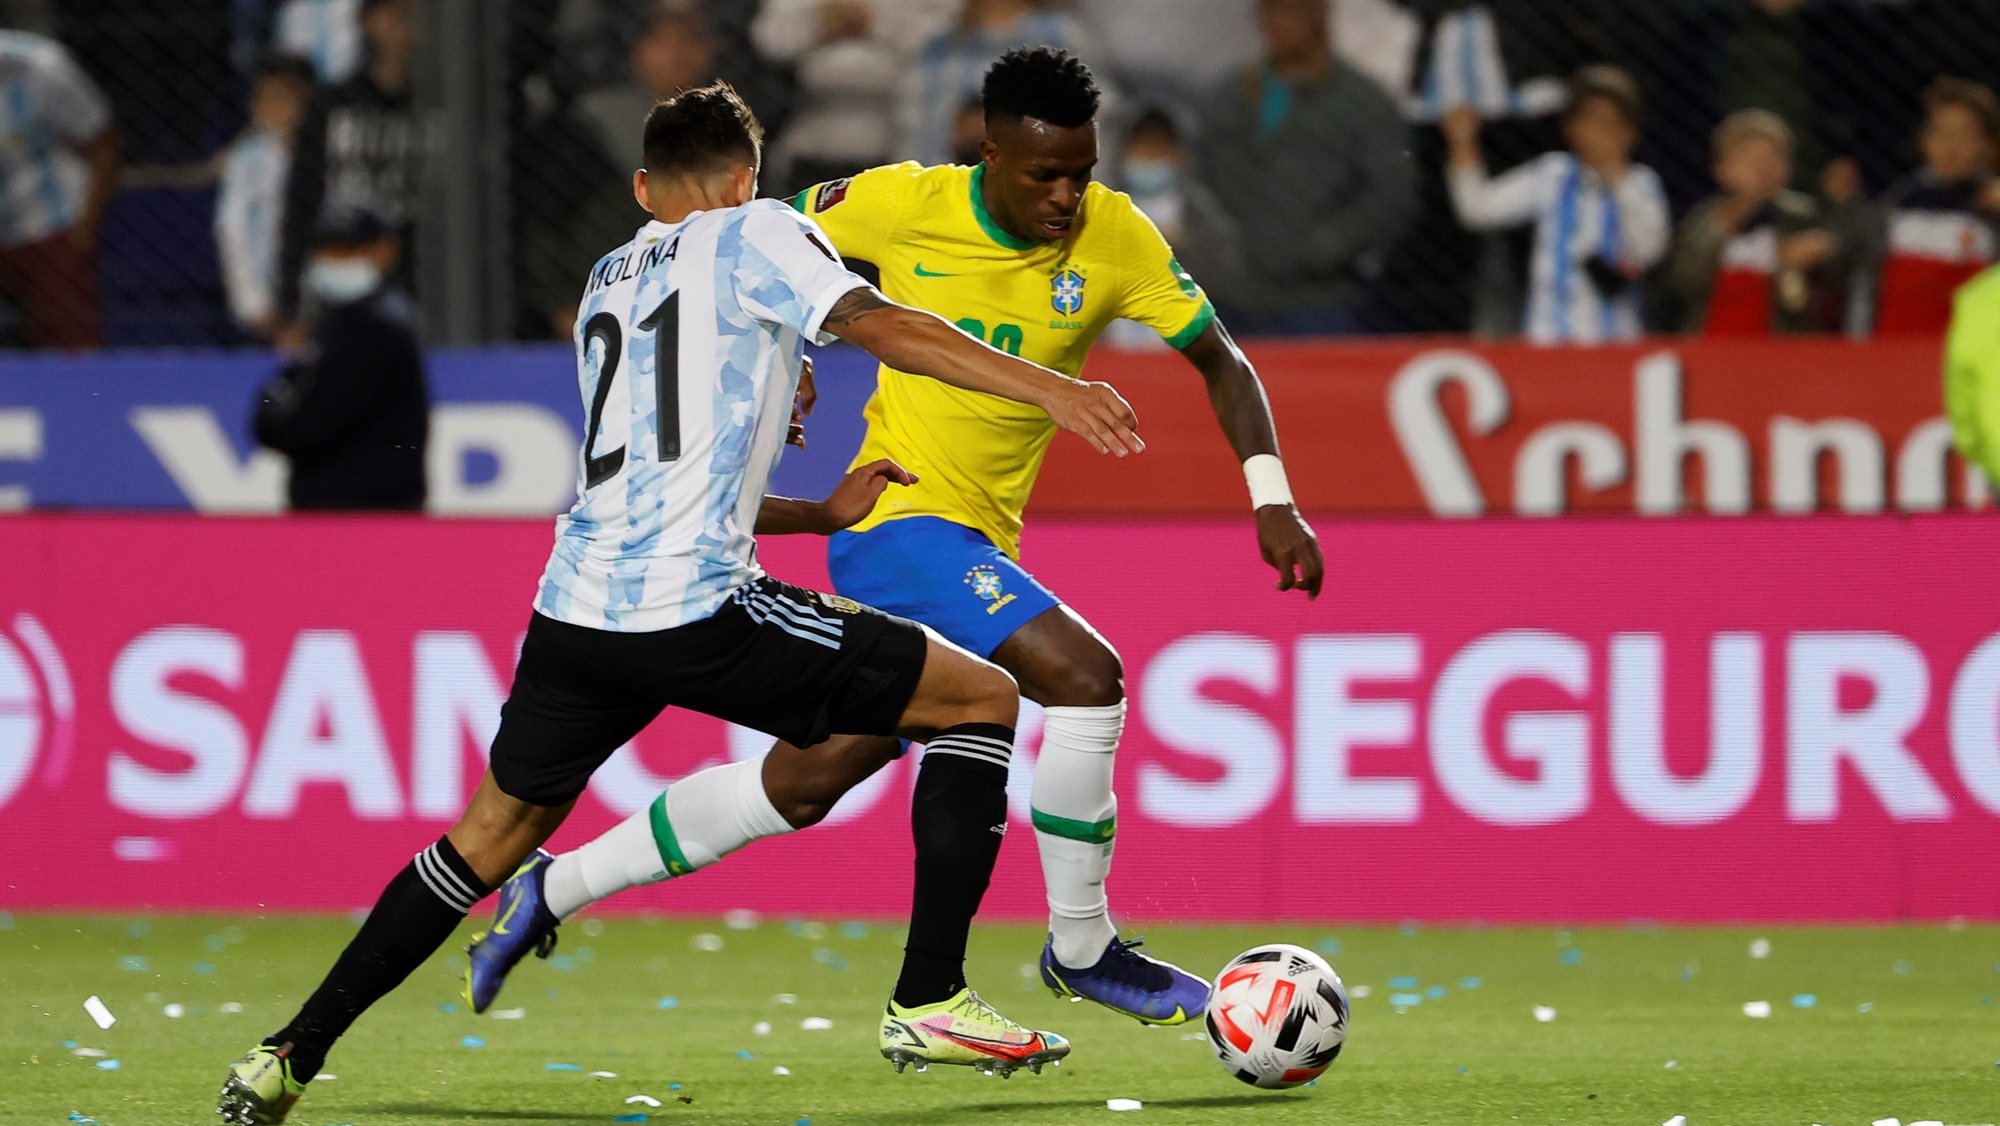 epa09586370 Nahuel Molina (L), of Argentina, disputes the ball with Vinicius (R), of Brazil, during the South American qualifying soccer match for the Qatar 2022 World Cup between Argentina and Brazil, at the San Juan del Bicentenario stadium, in San Juan, Argentina, 16 November 2021.  EPA/JUAN IGNACIO RONCORONI